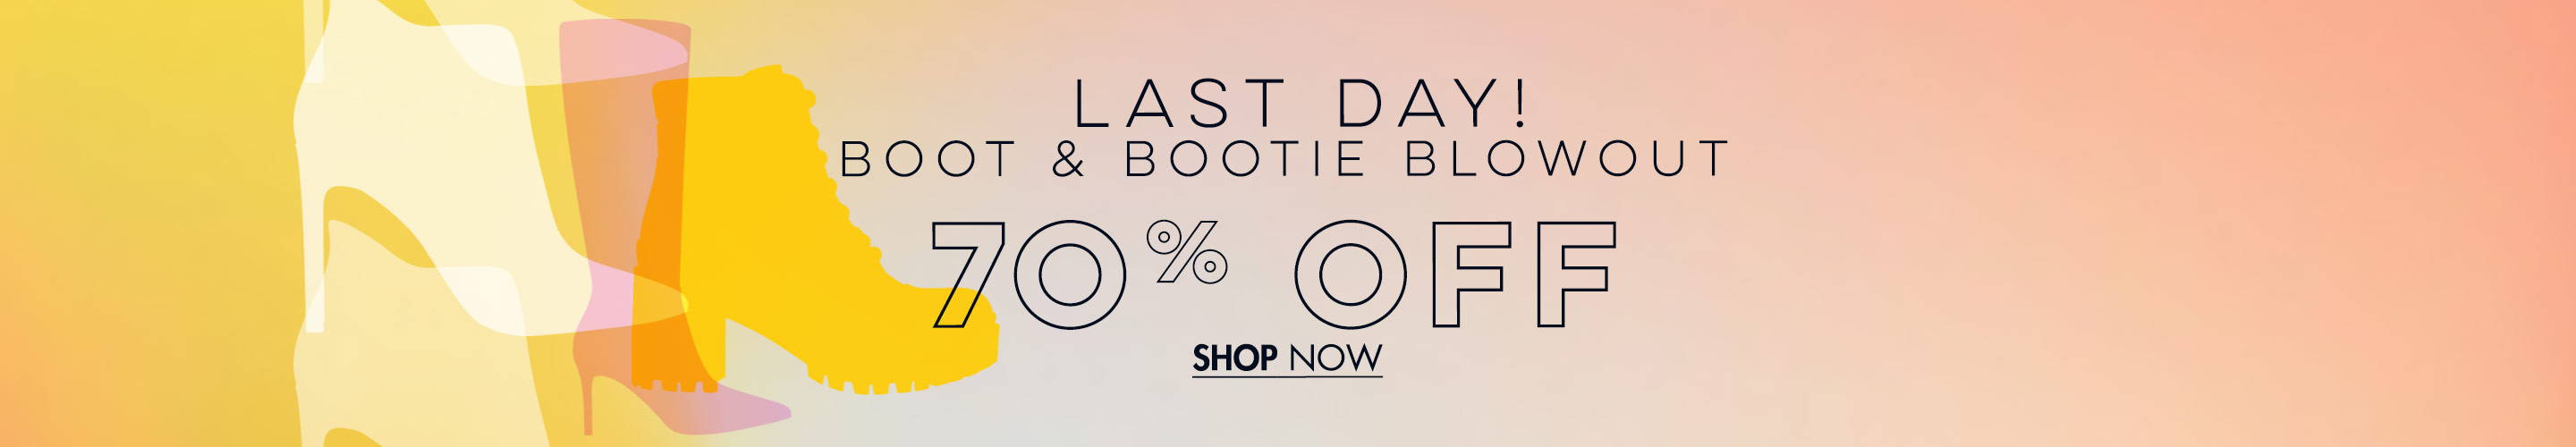 Boot & Bootie Blowout